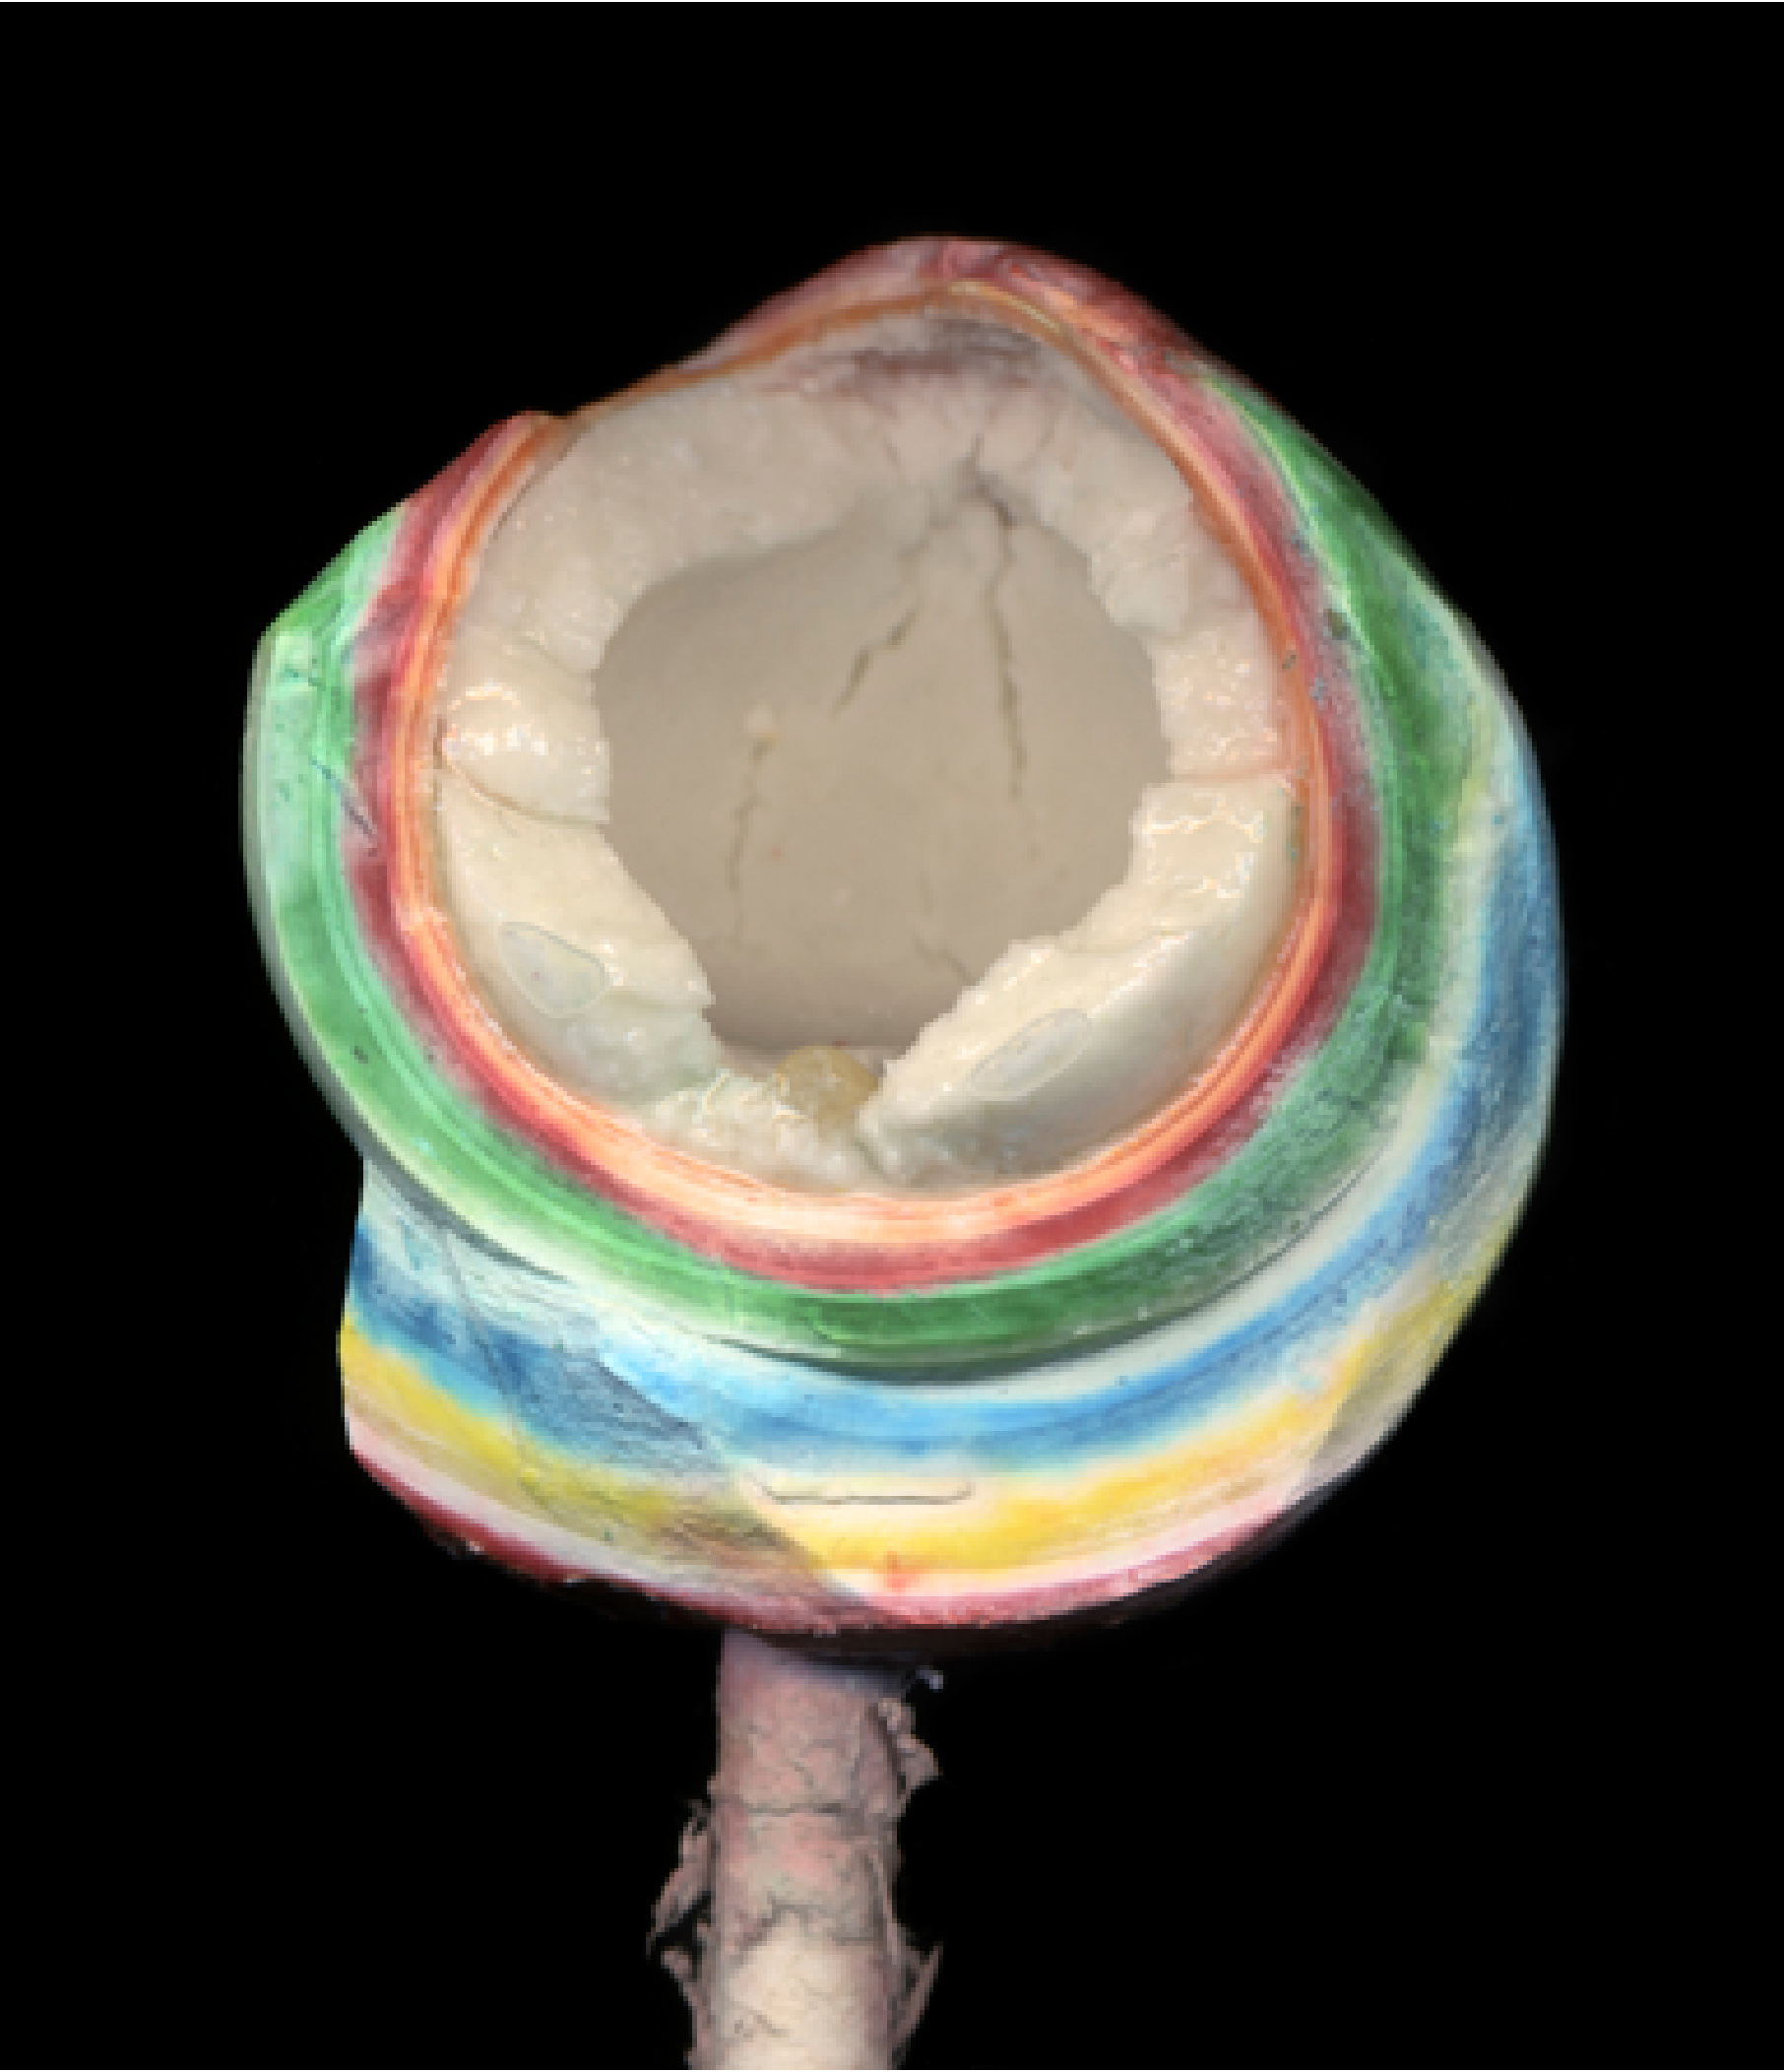 Worlds Largest Jaw Breaker (after 5 Days)